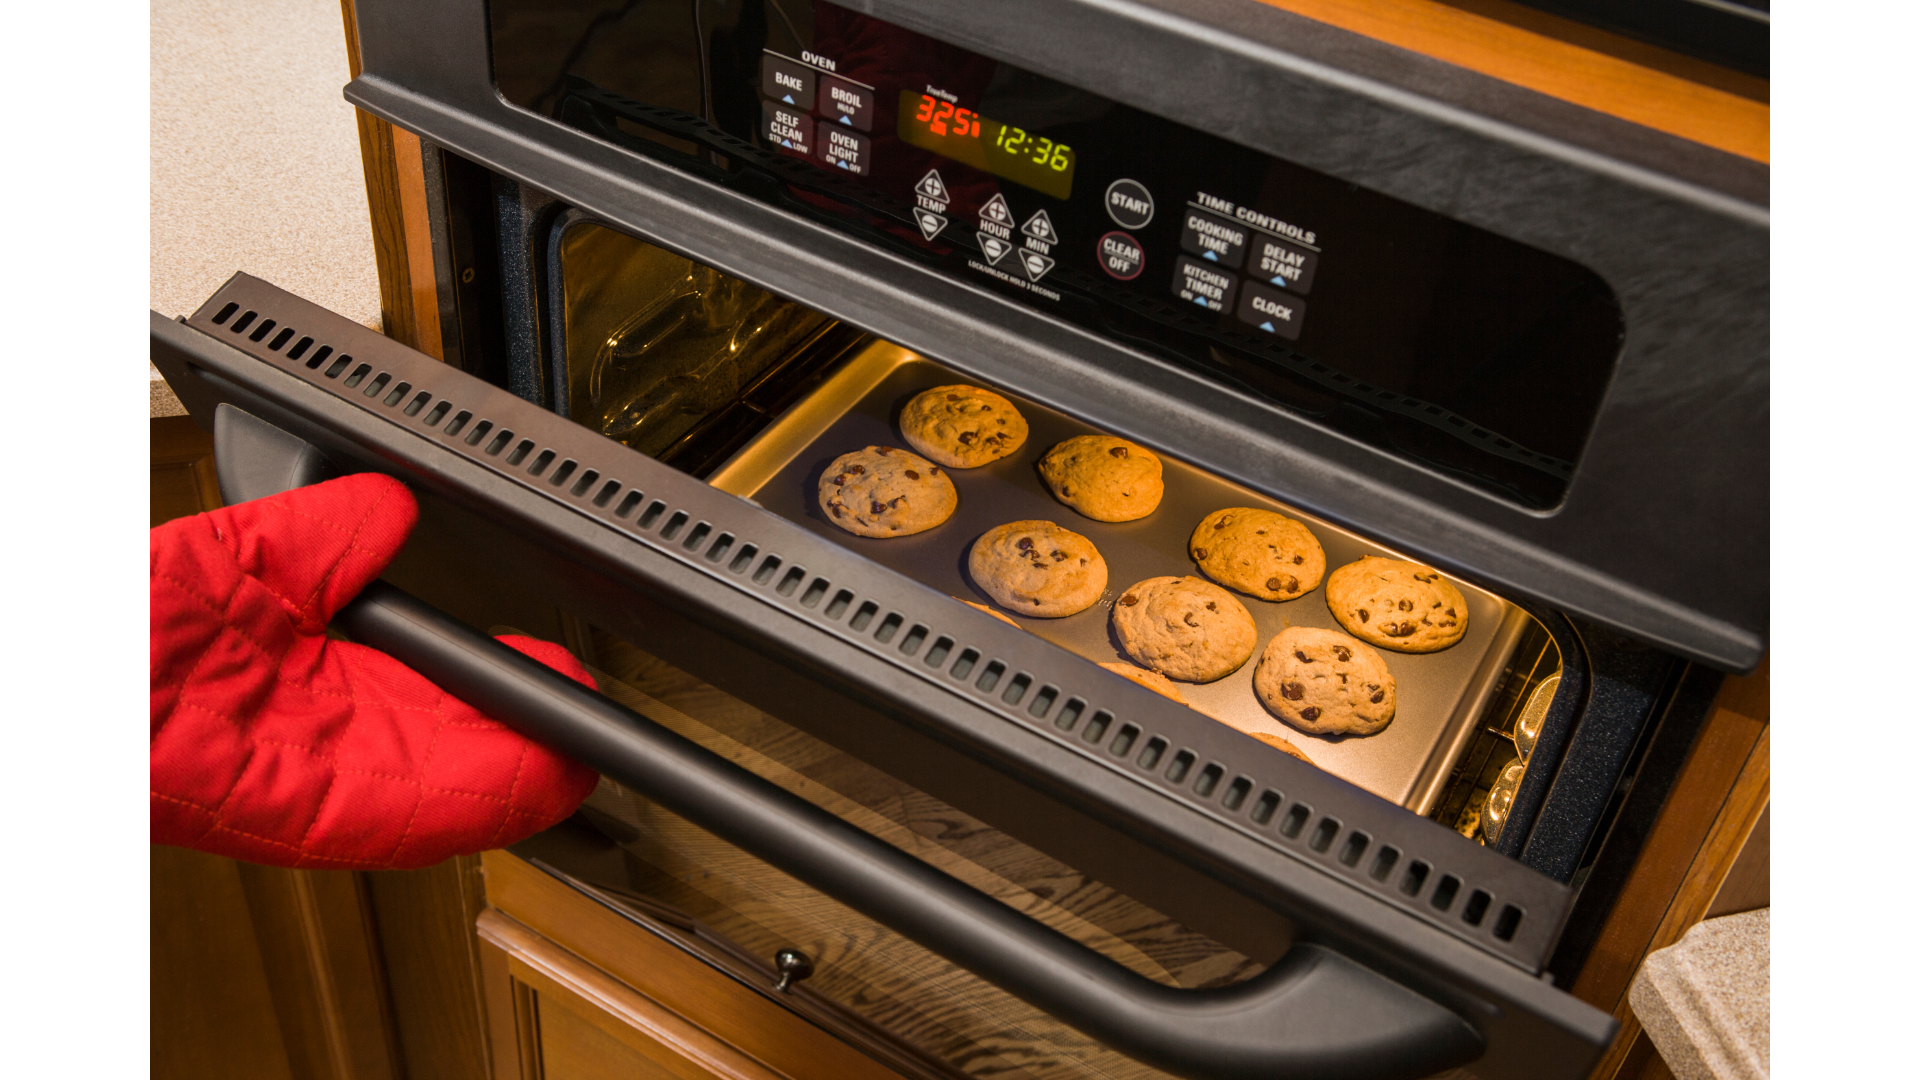 Is Your Oven Baking Unevenly? Let's take a look!